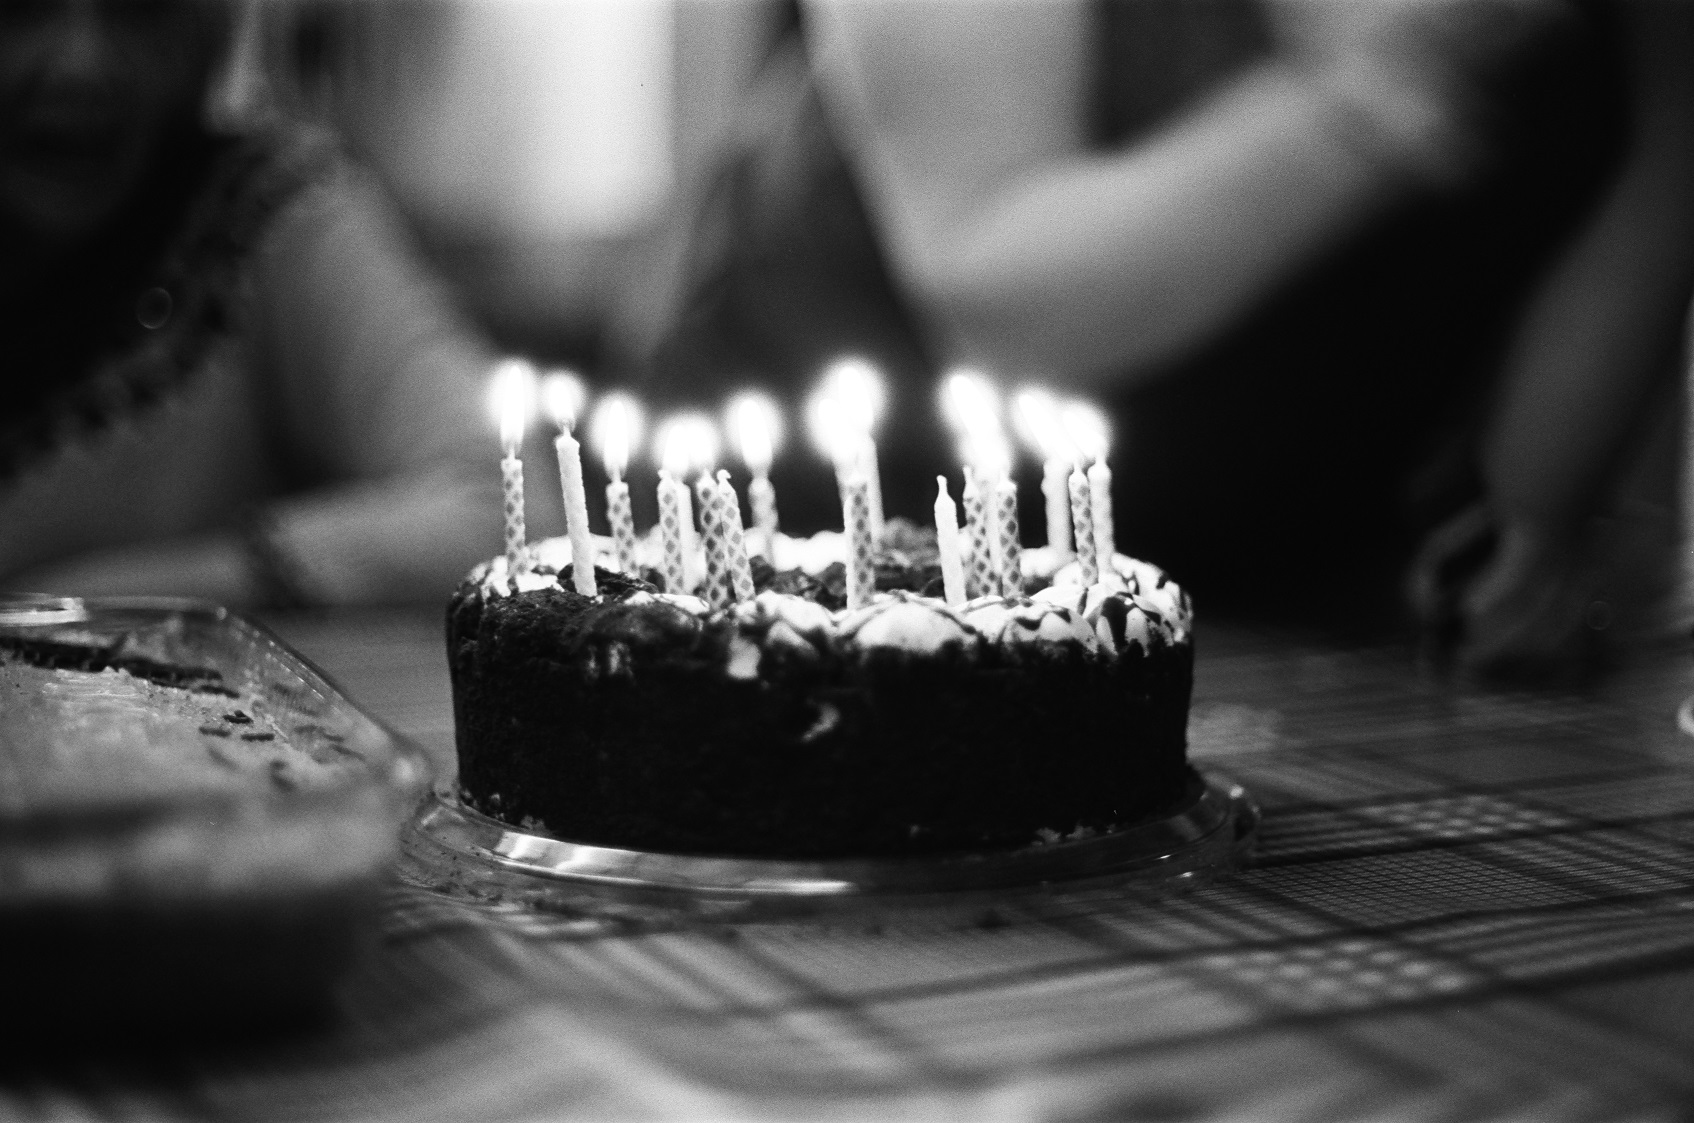 PICTURED: A black and white picture of a birthday cake and candles.